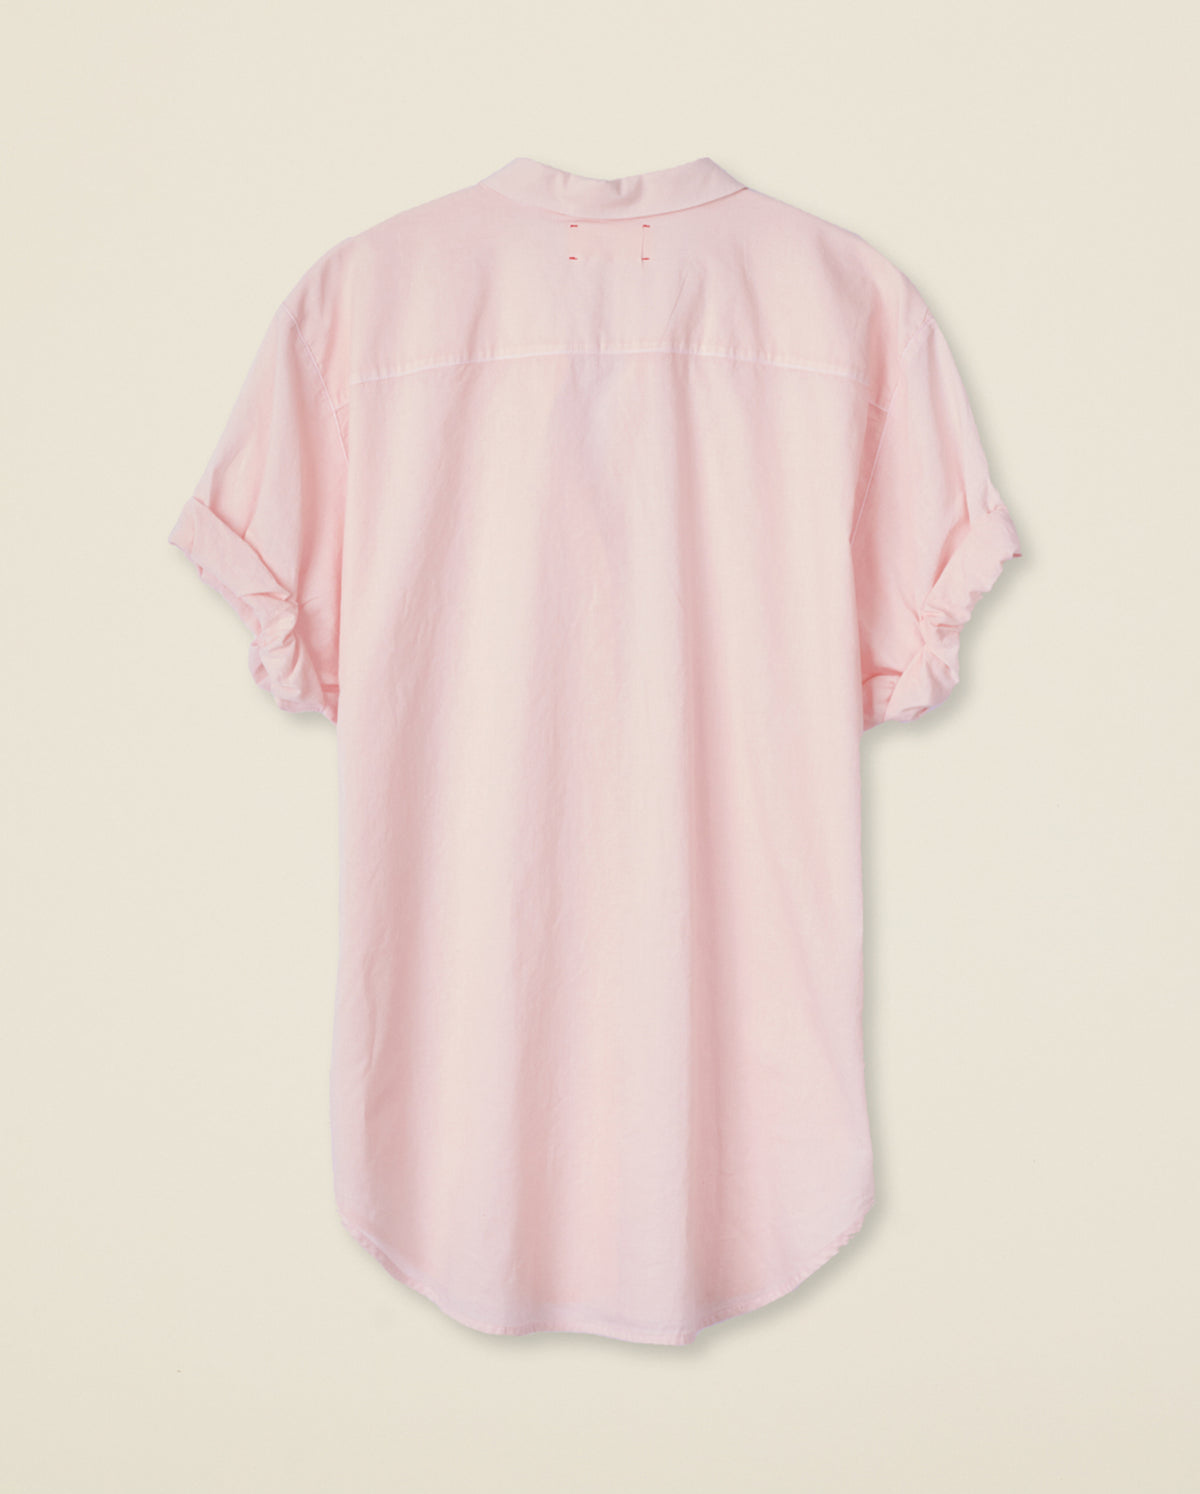 Channing Shirt - Pomelo